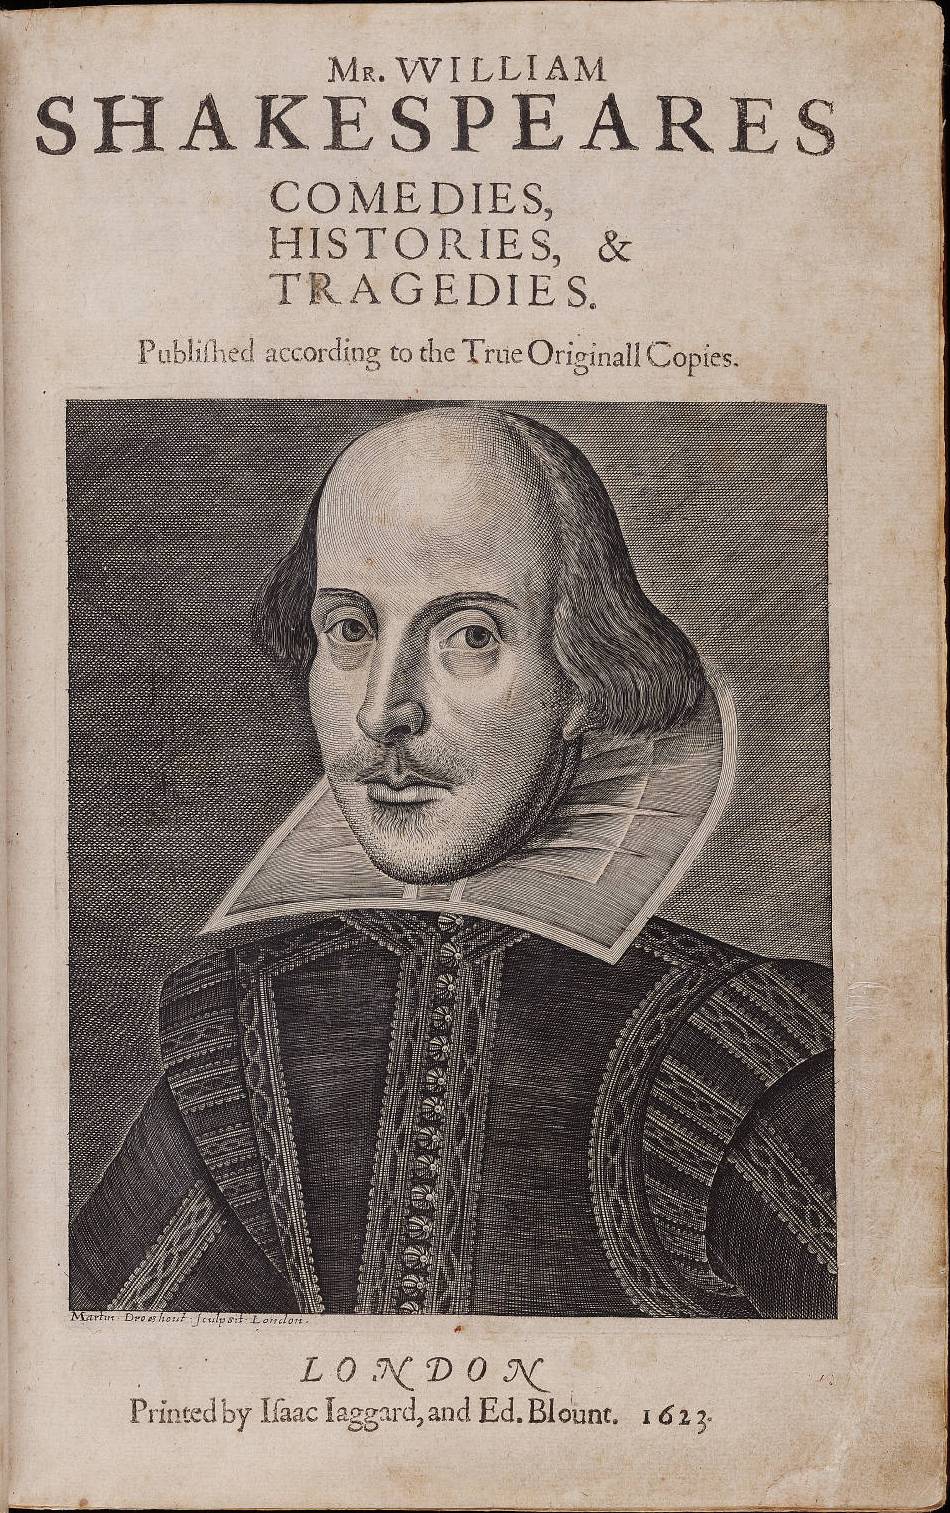 Image result for shakespeare first folio